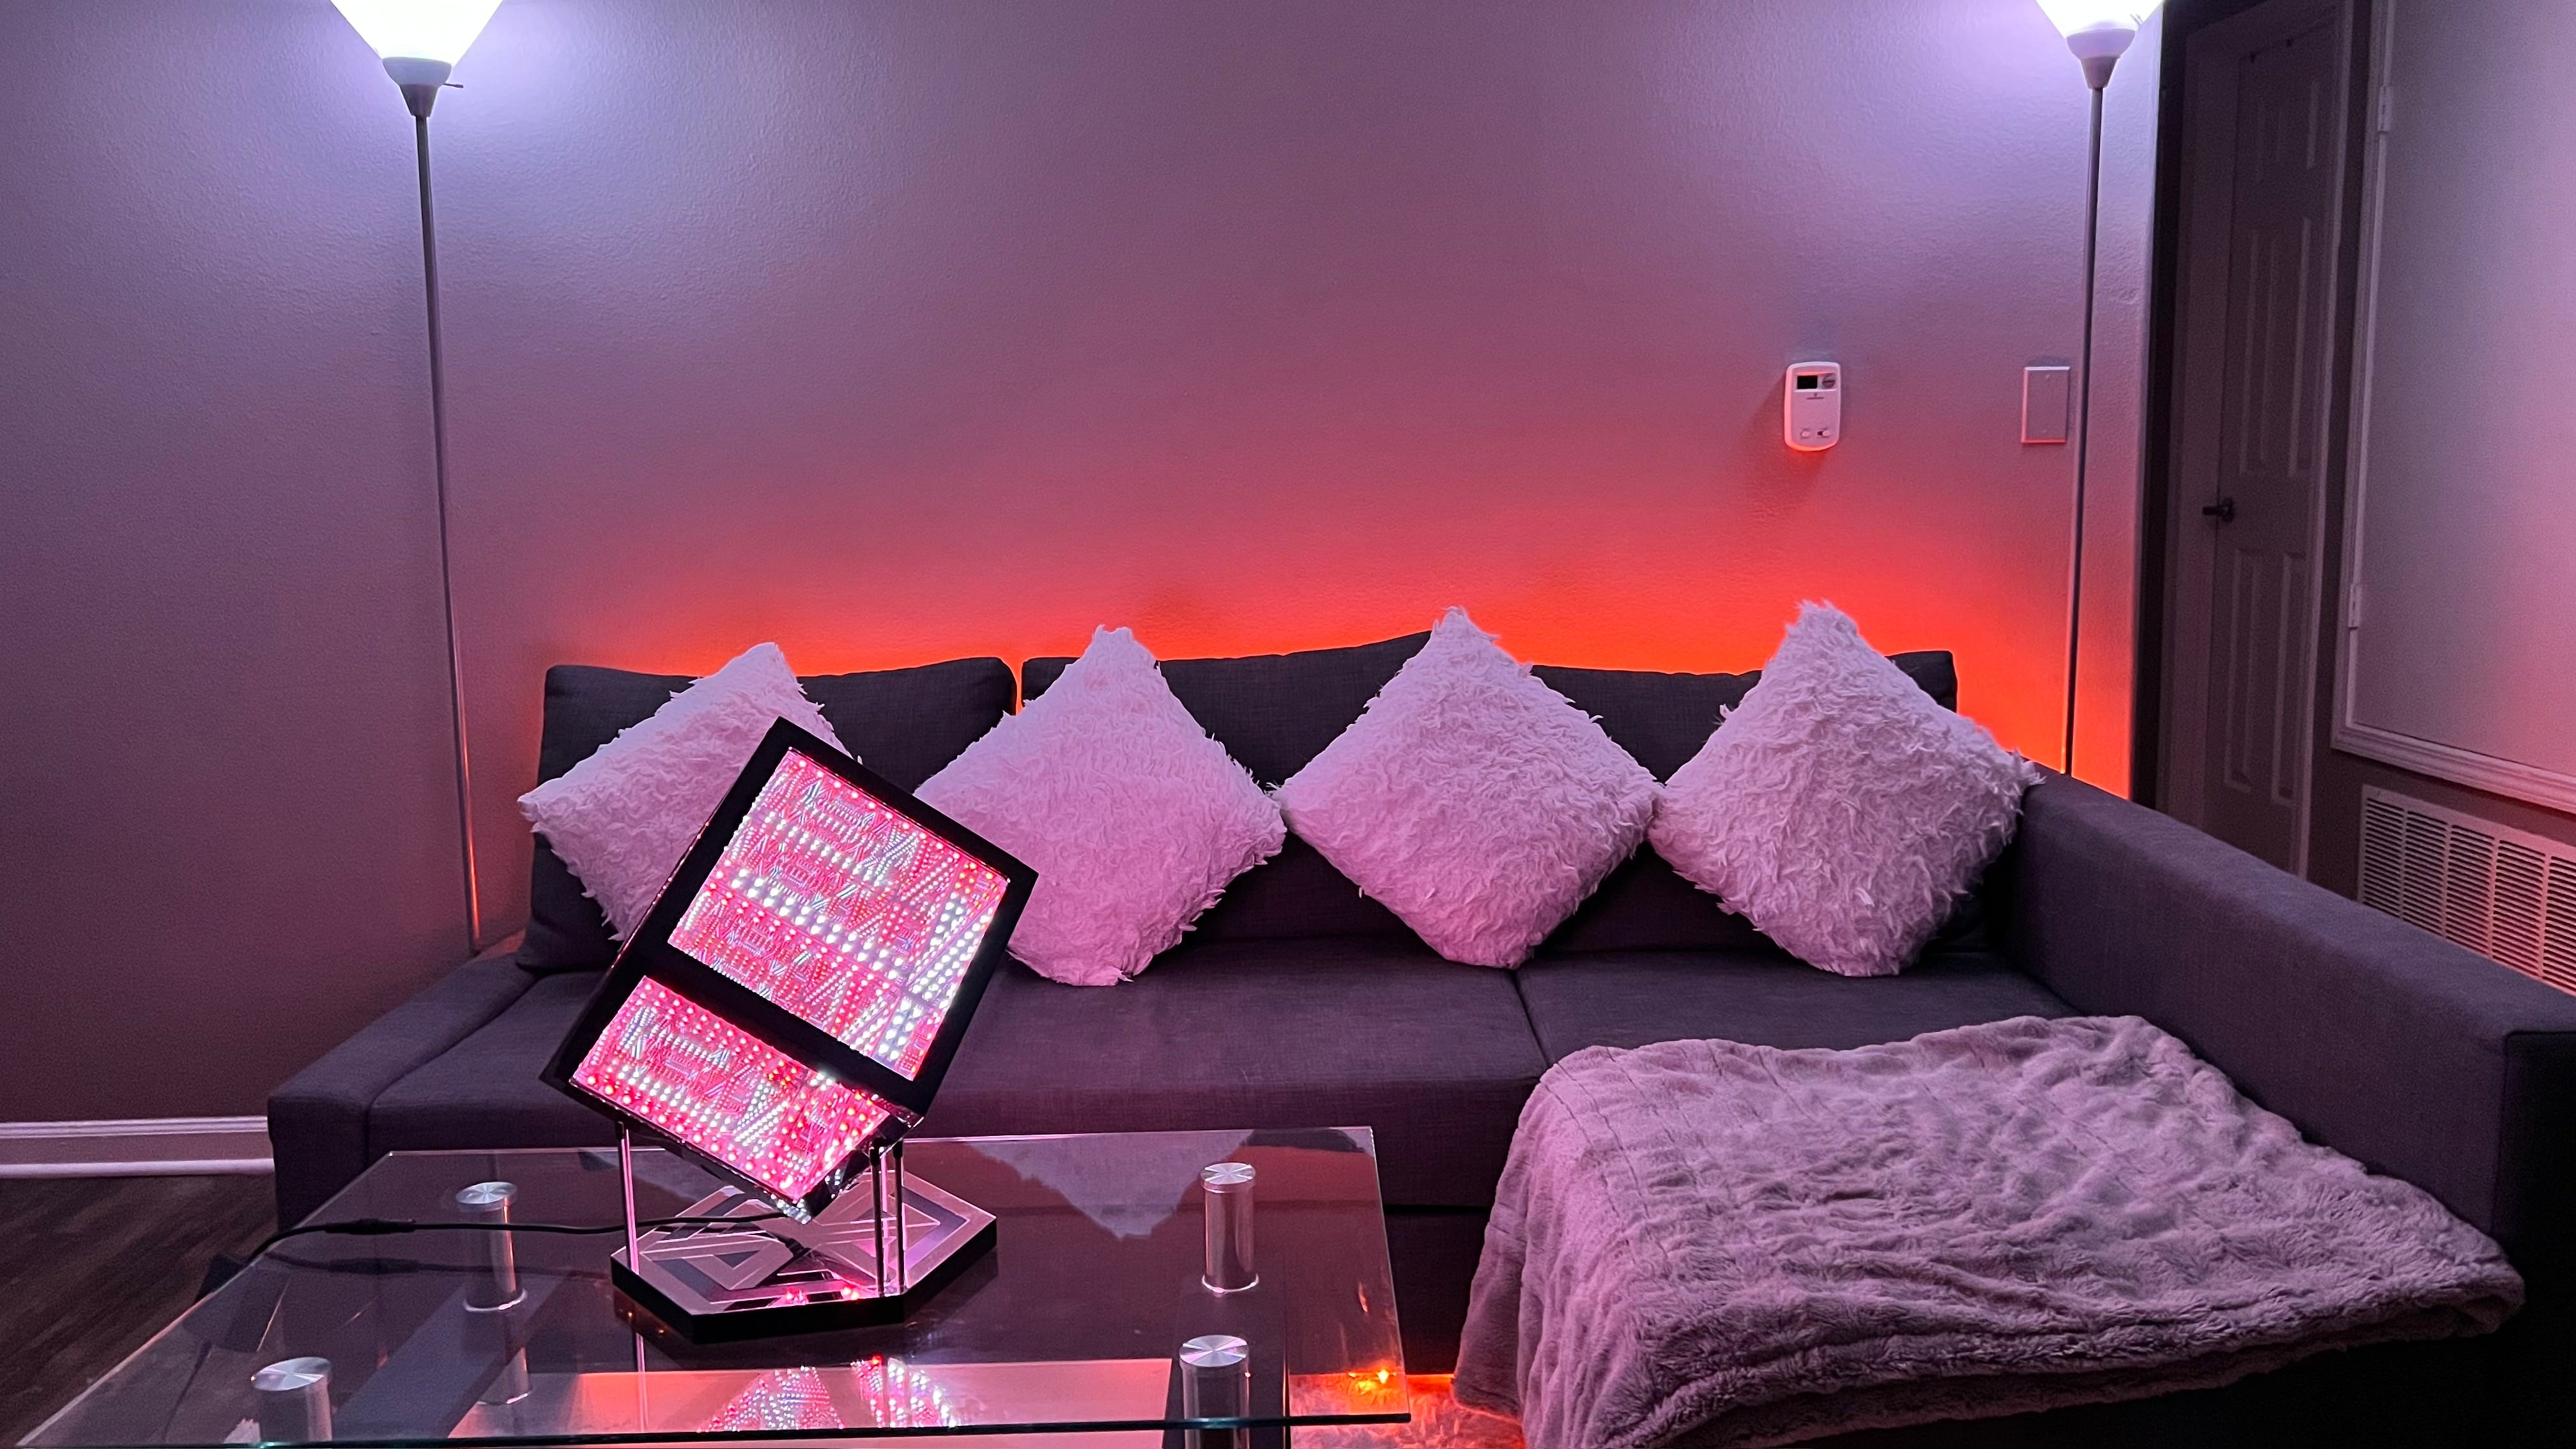 Living room, with a couch and four pillows on it illuminated by backlighting from LED color changing lights, and a Hypercube on the coffee table